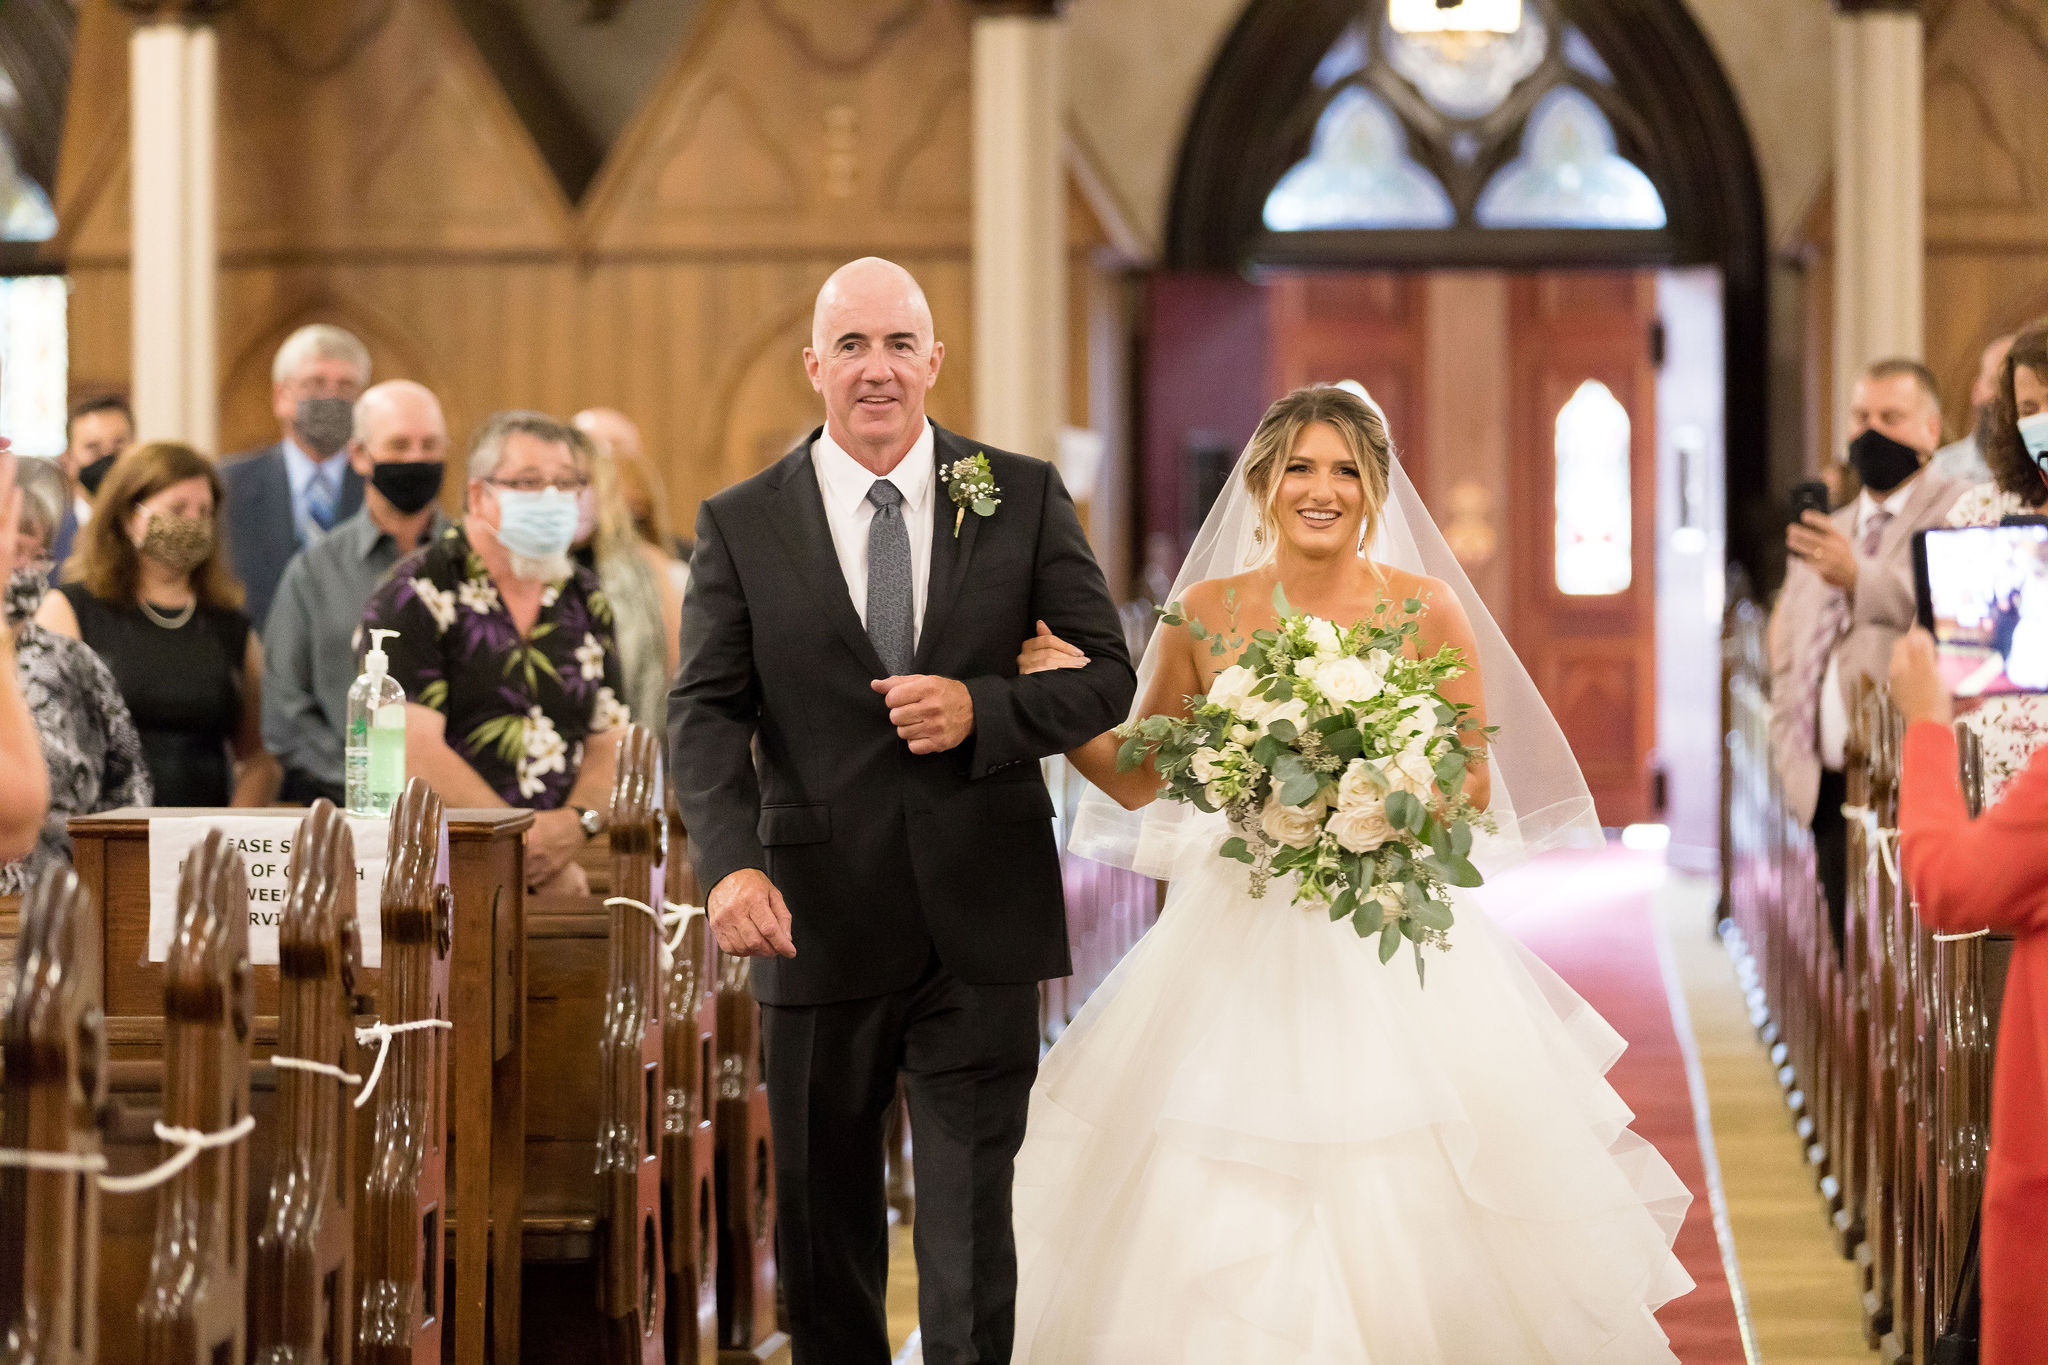 seeing bride for first time at church wedding